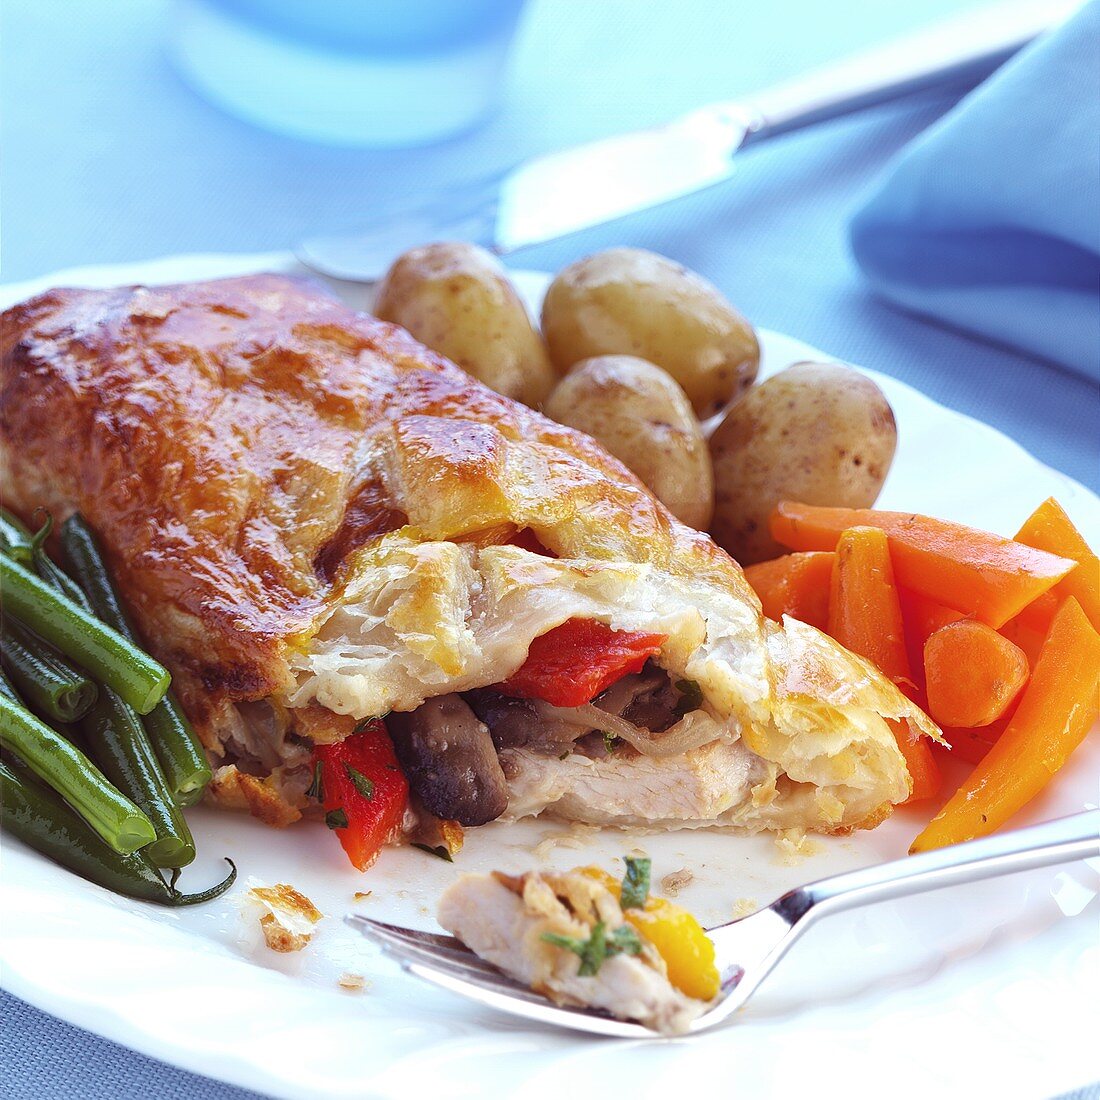 Filo pastry with chicken and vegetable filling